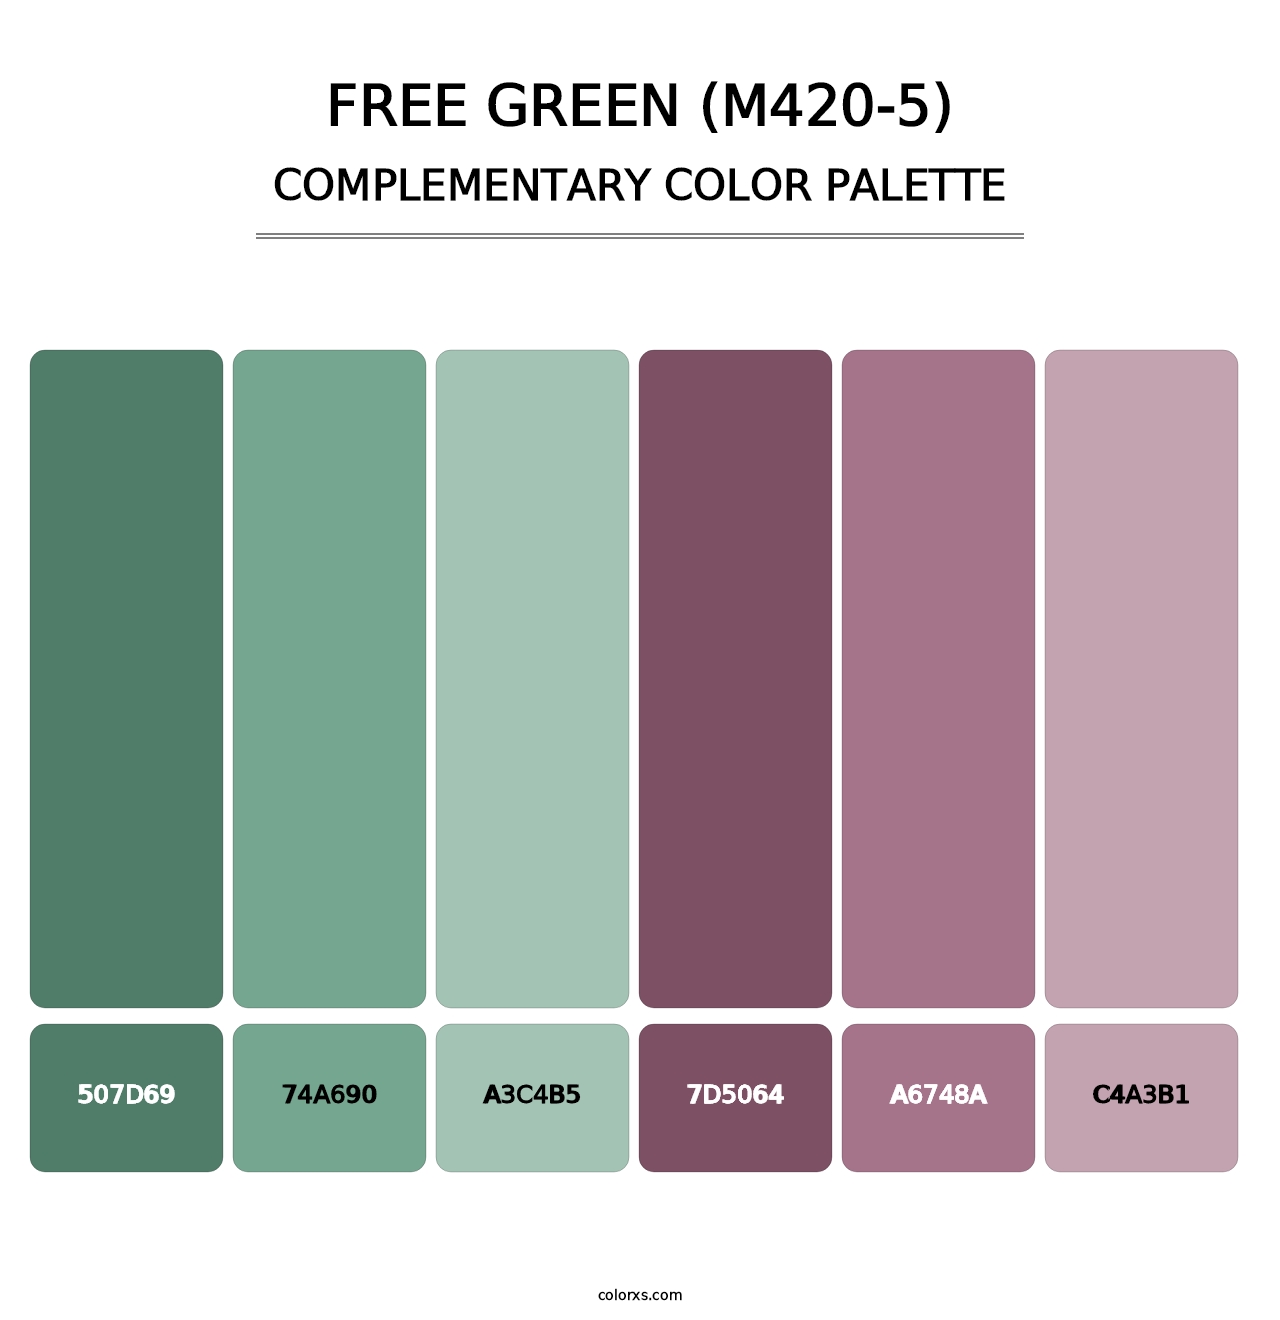 Free Green (M420-5) - Complementary Color Palette